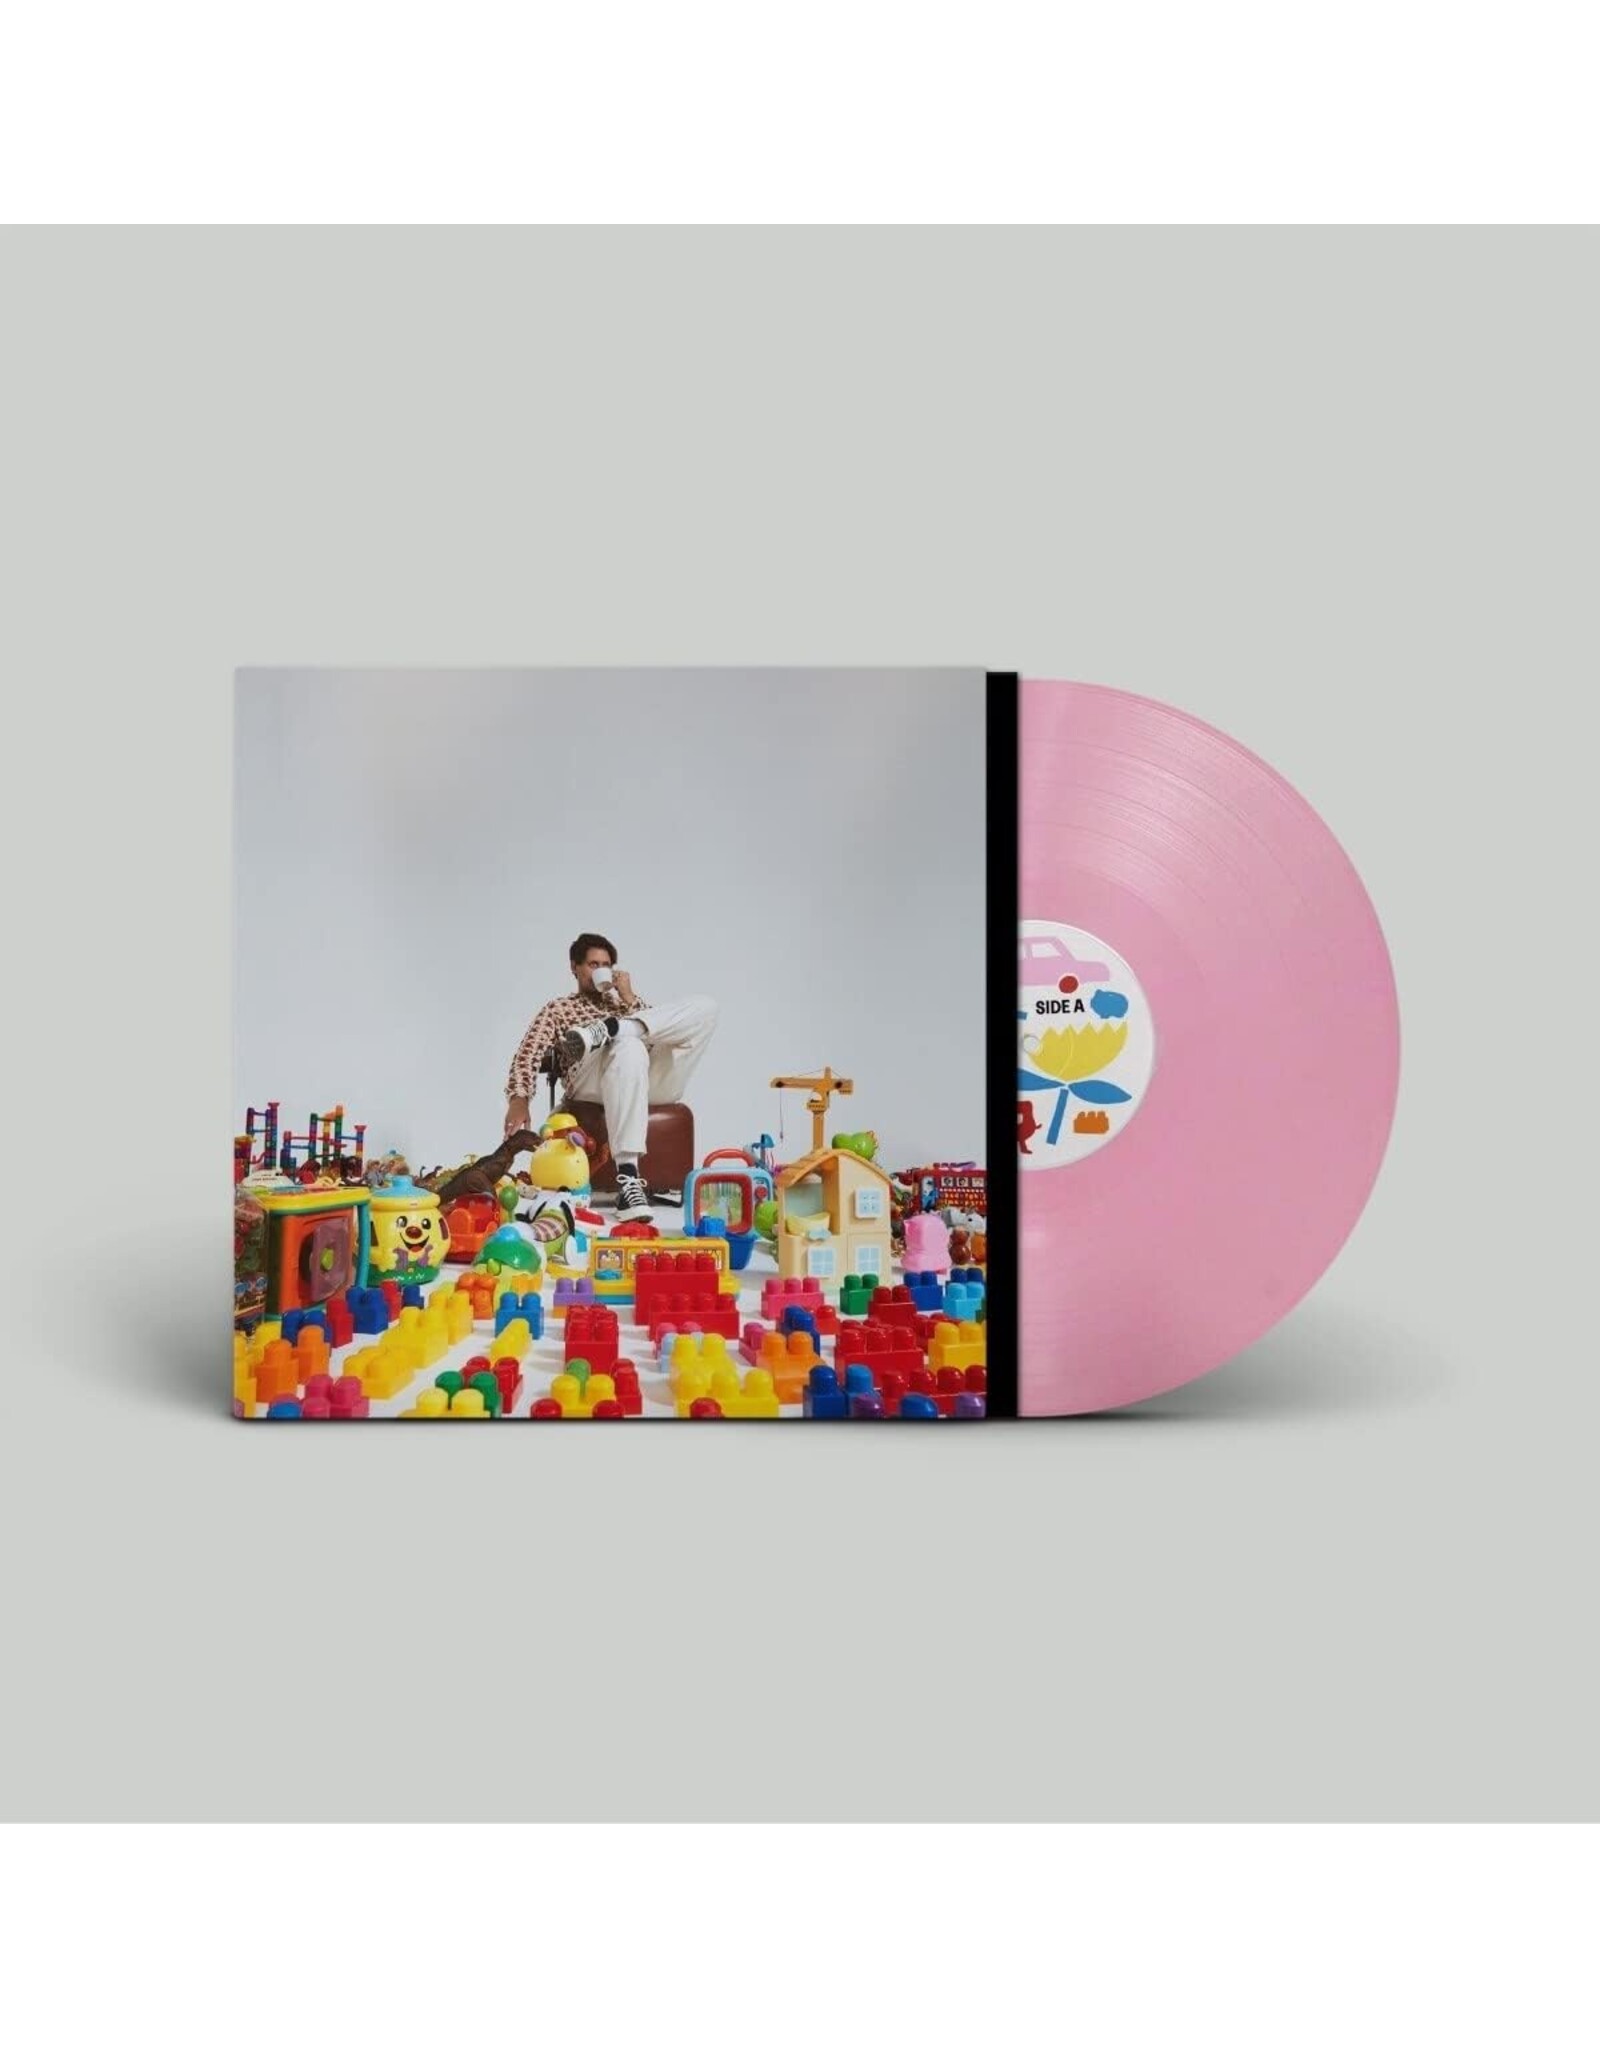 Barry Can't Swim - When Will We Land? (Pink Flamingo Vinyl)